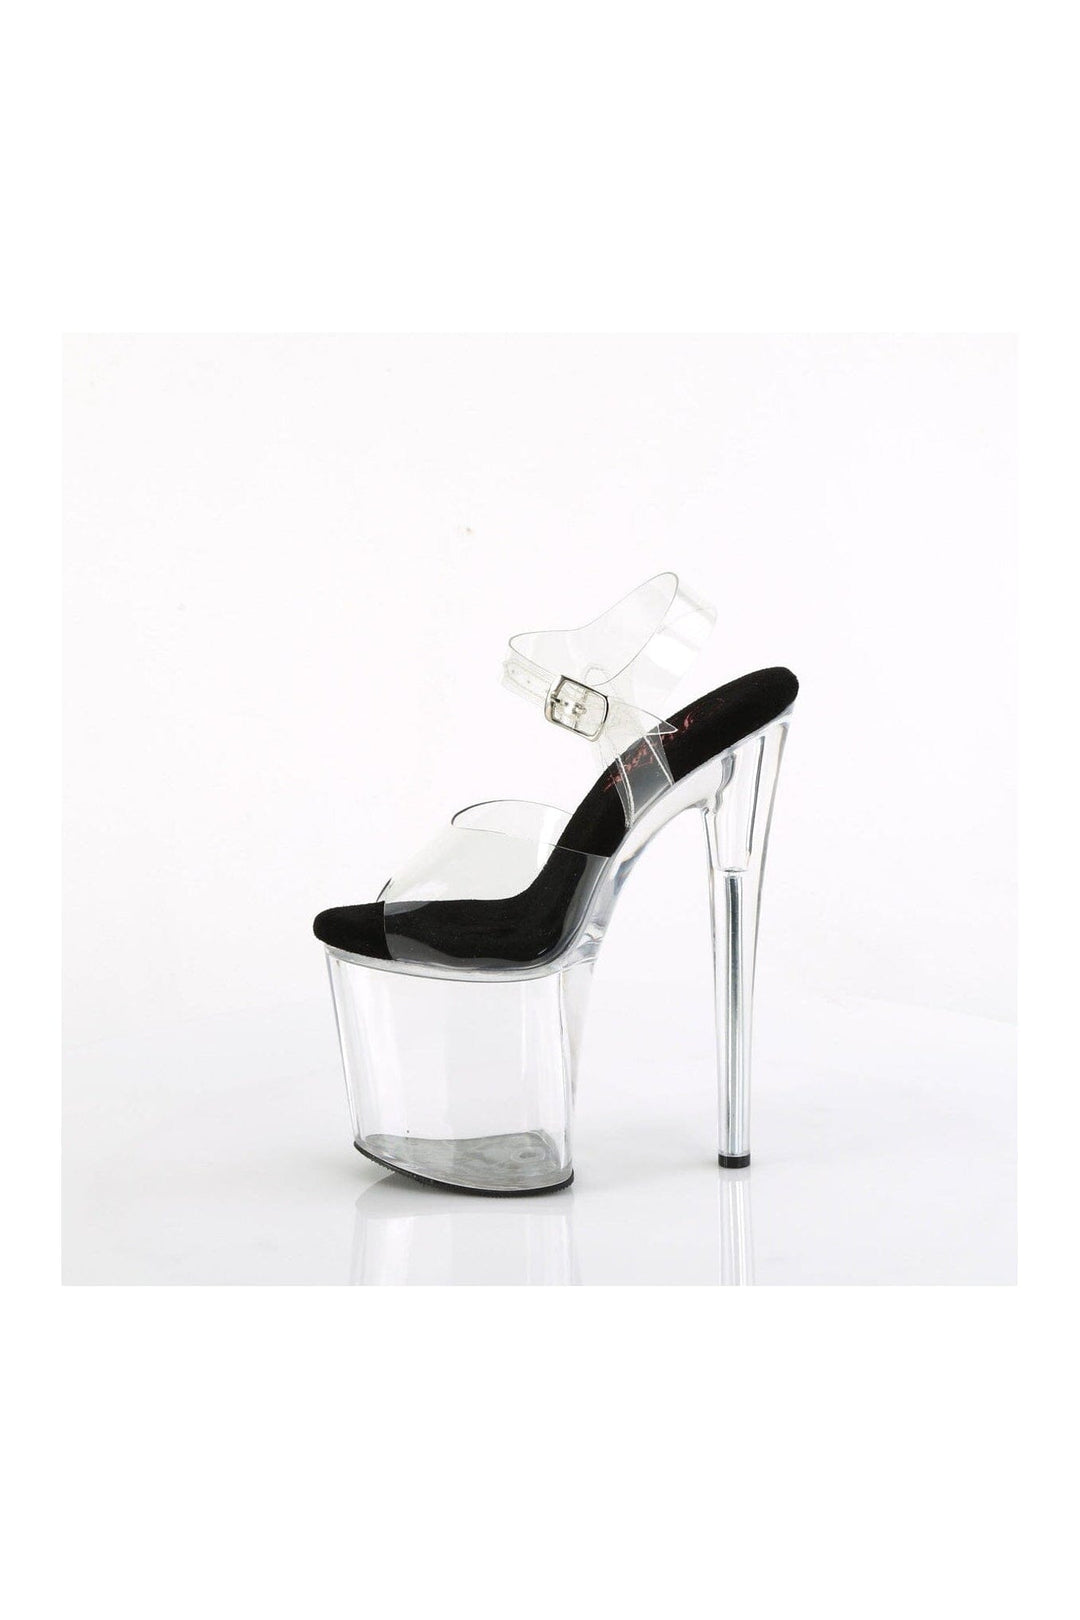 NAUGHTY-808 Clear PVC Sandal-Sandals-Pleaser-SEXYSHOES.COM